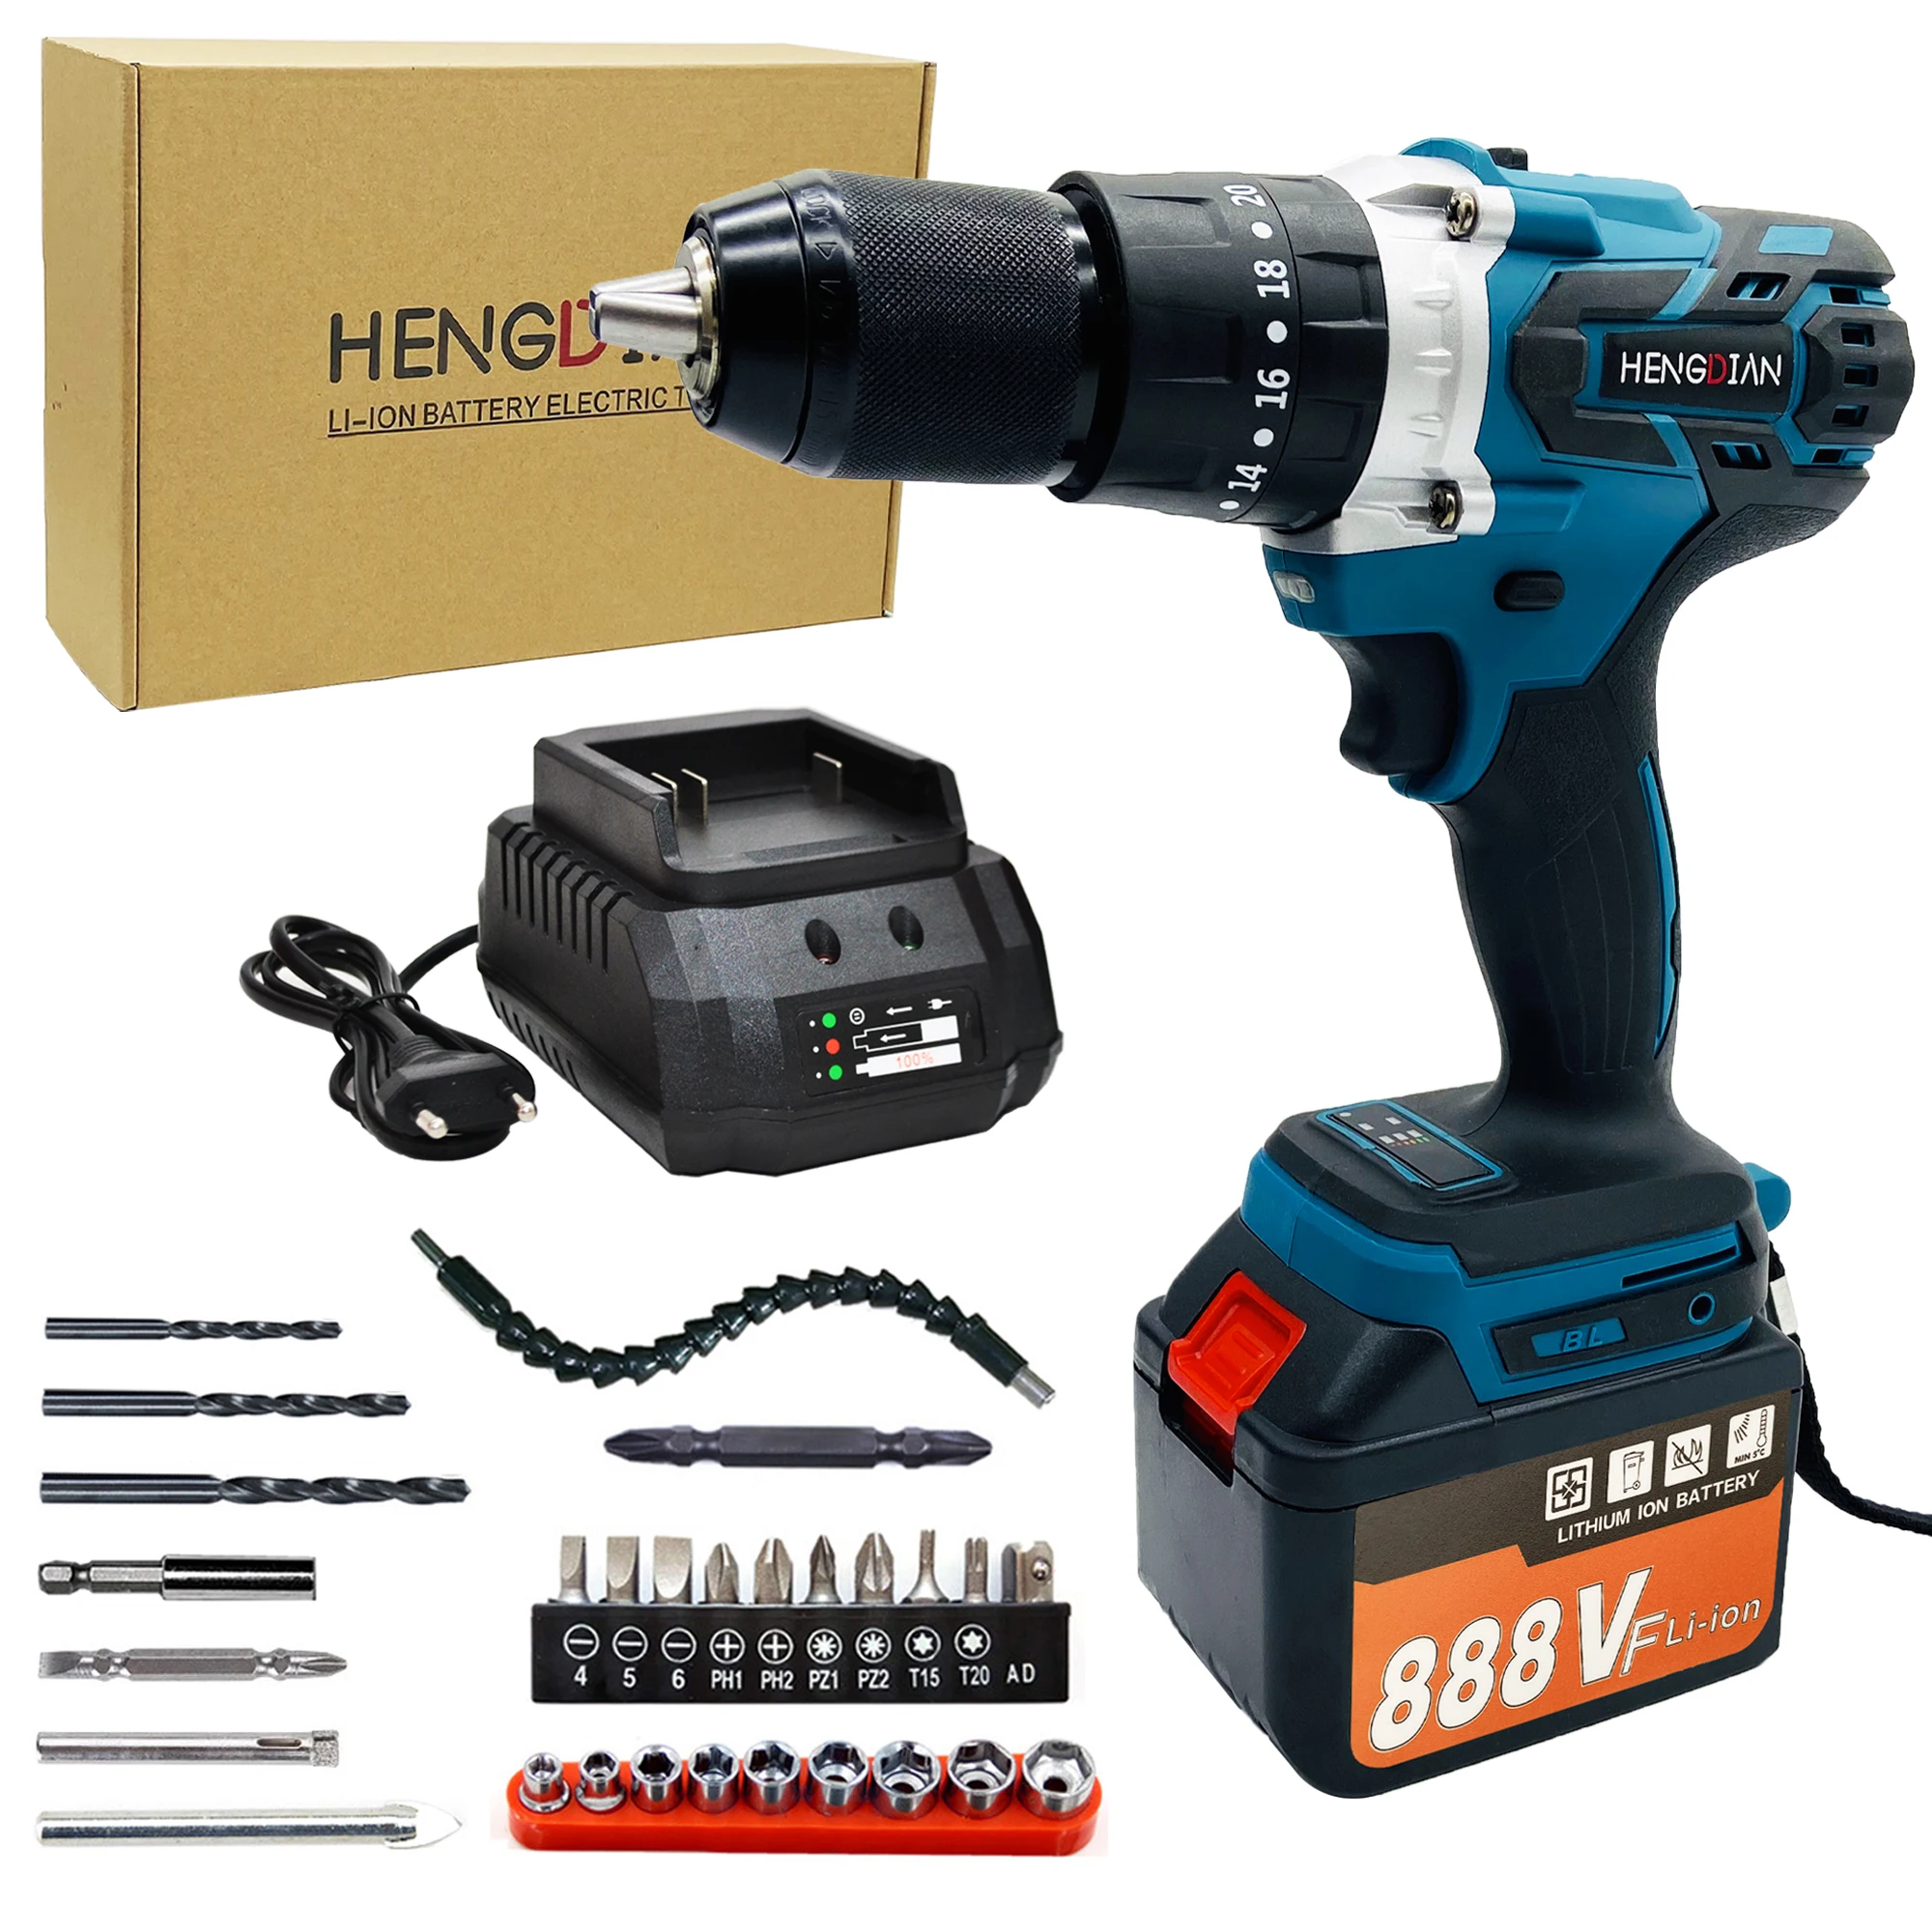 20V Brushless Battery Screwdriver Craft Drill Set Adjustable Torque Machine Impact Cordless Power Tools Electric Drill high quality machinery kit 4 0ah 5 0ah machine screwdriver impact cordless power 20v max power tools cordless drill